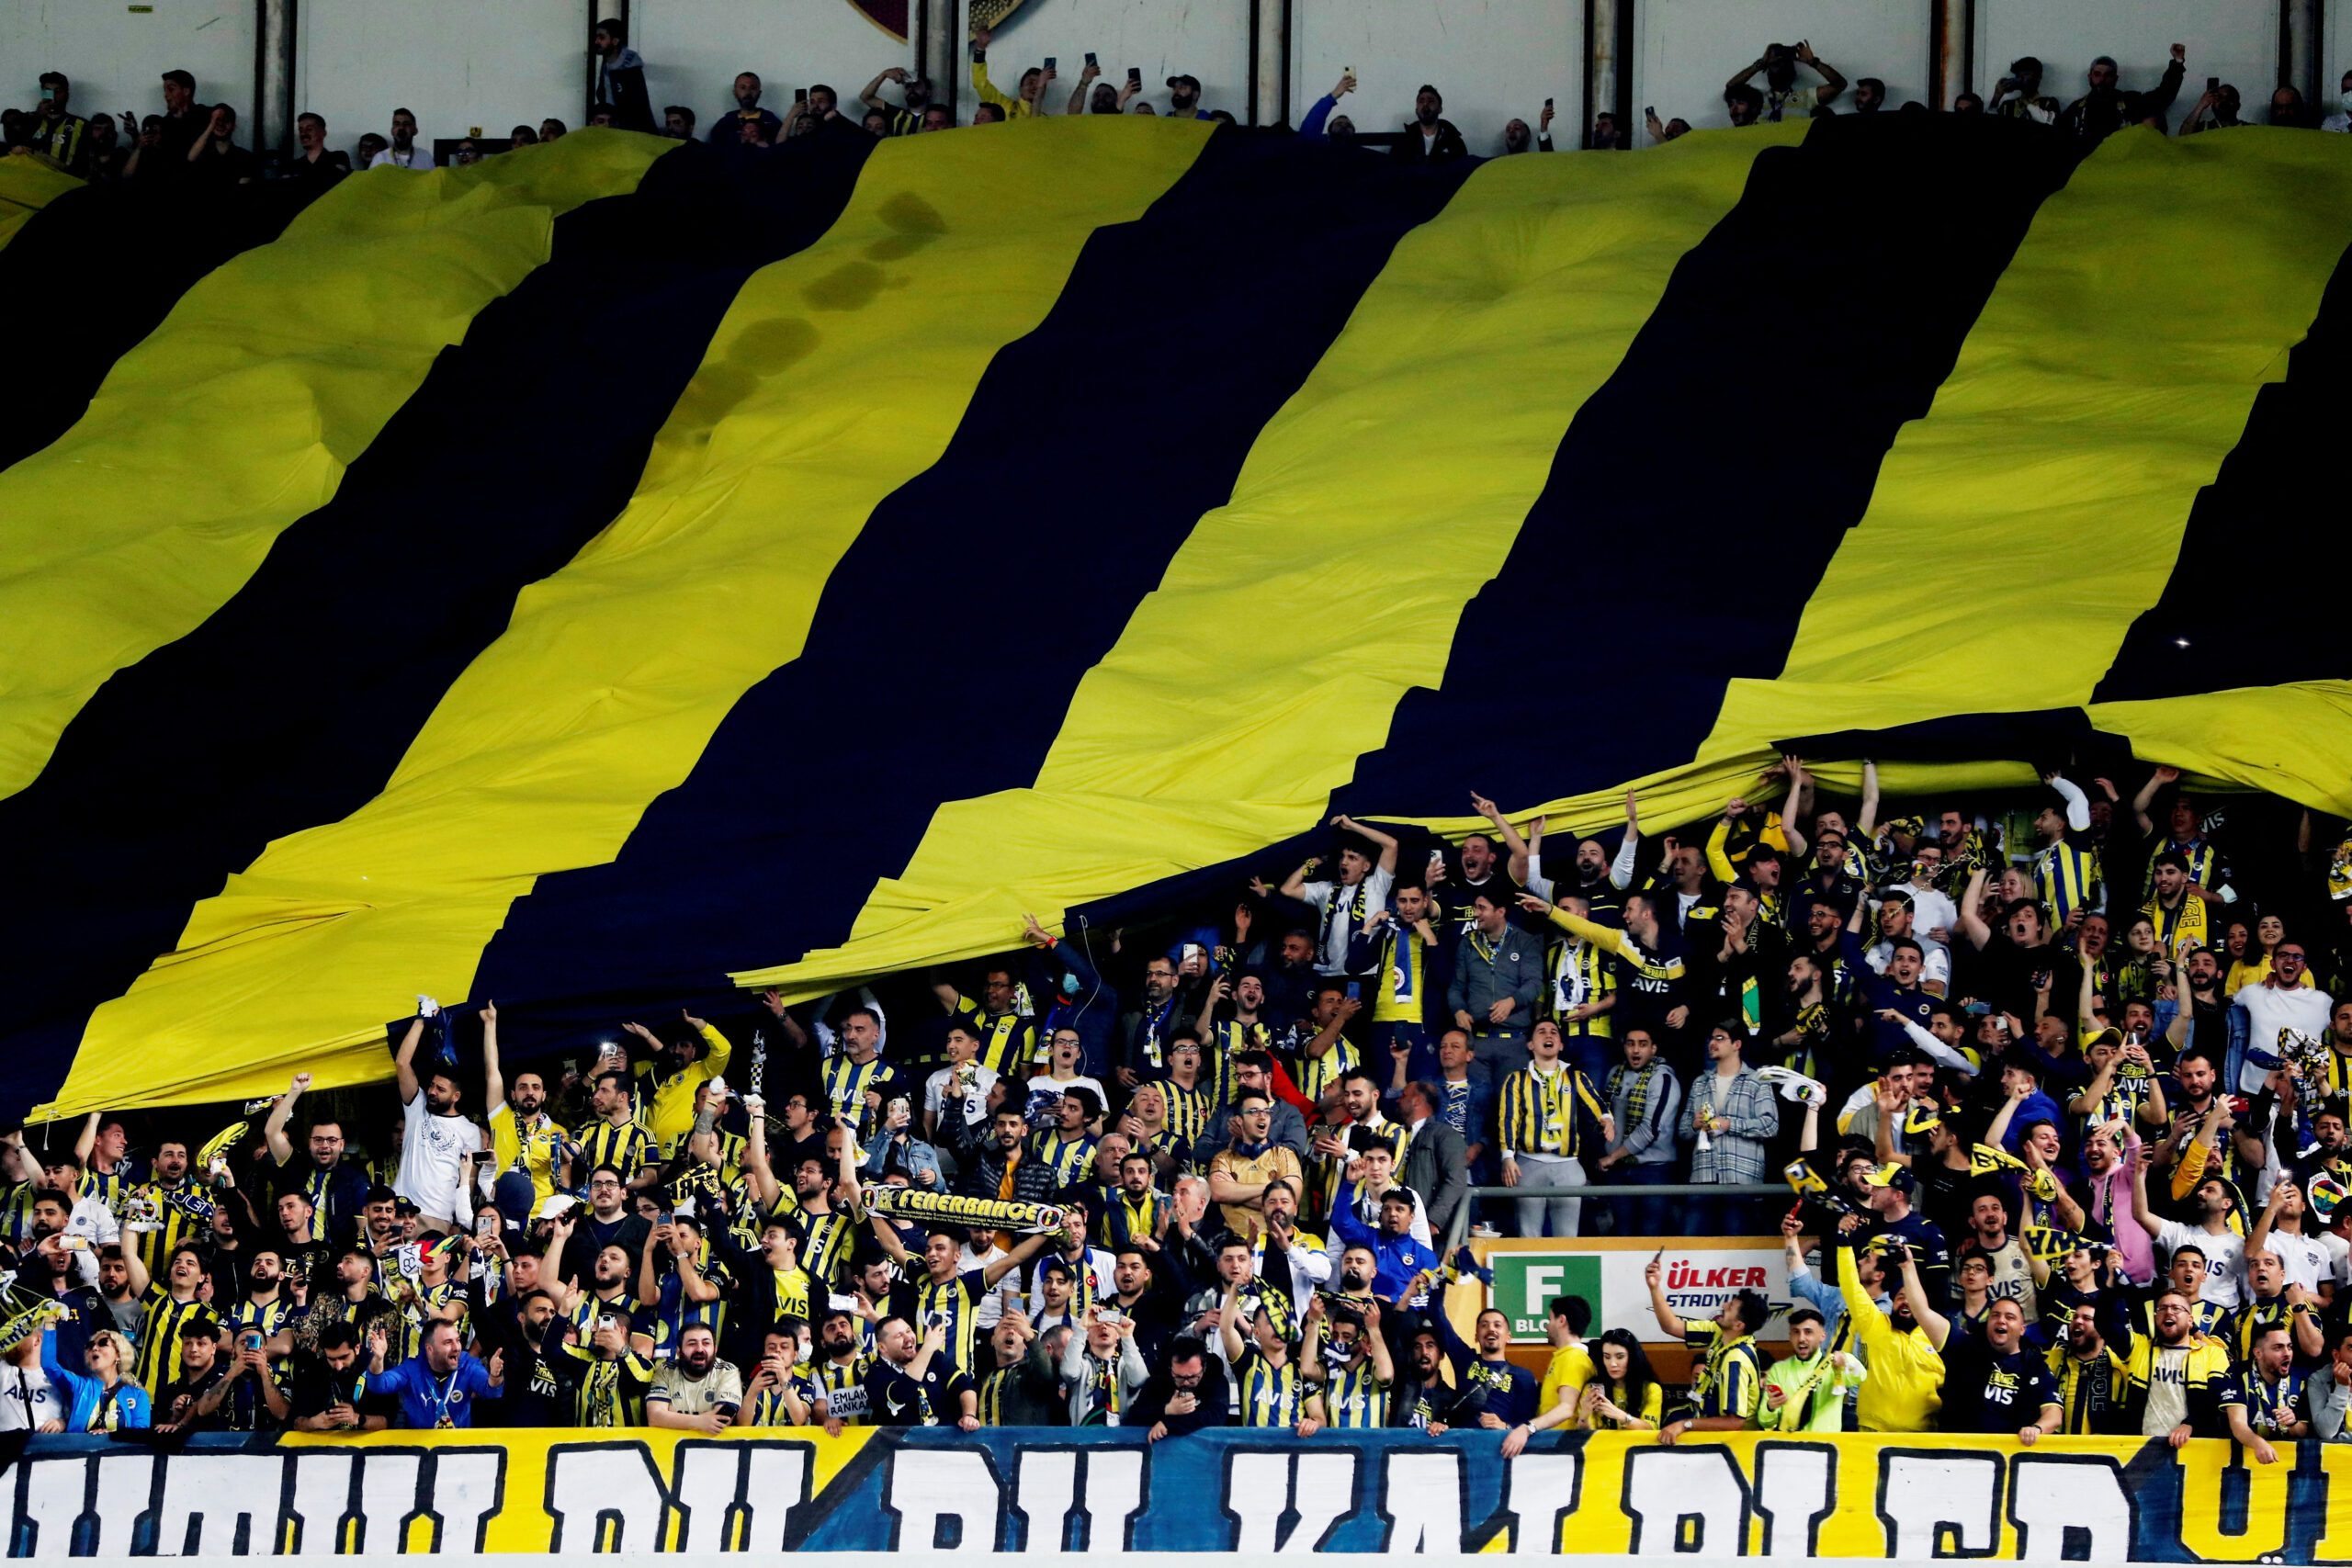 Fenerbahce given partial stadium closure after Putin chants for Ukrainian club